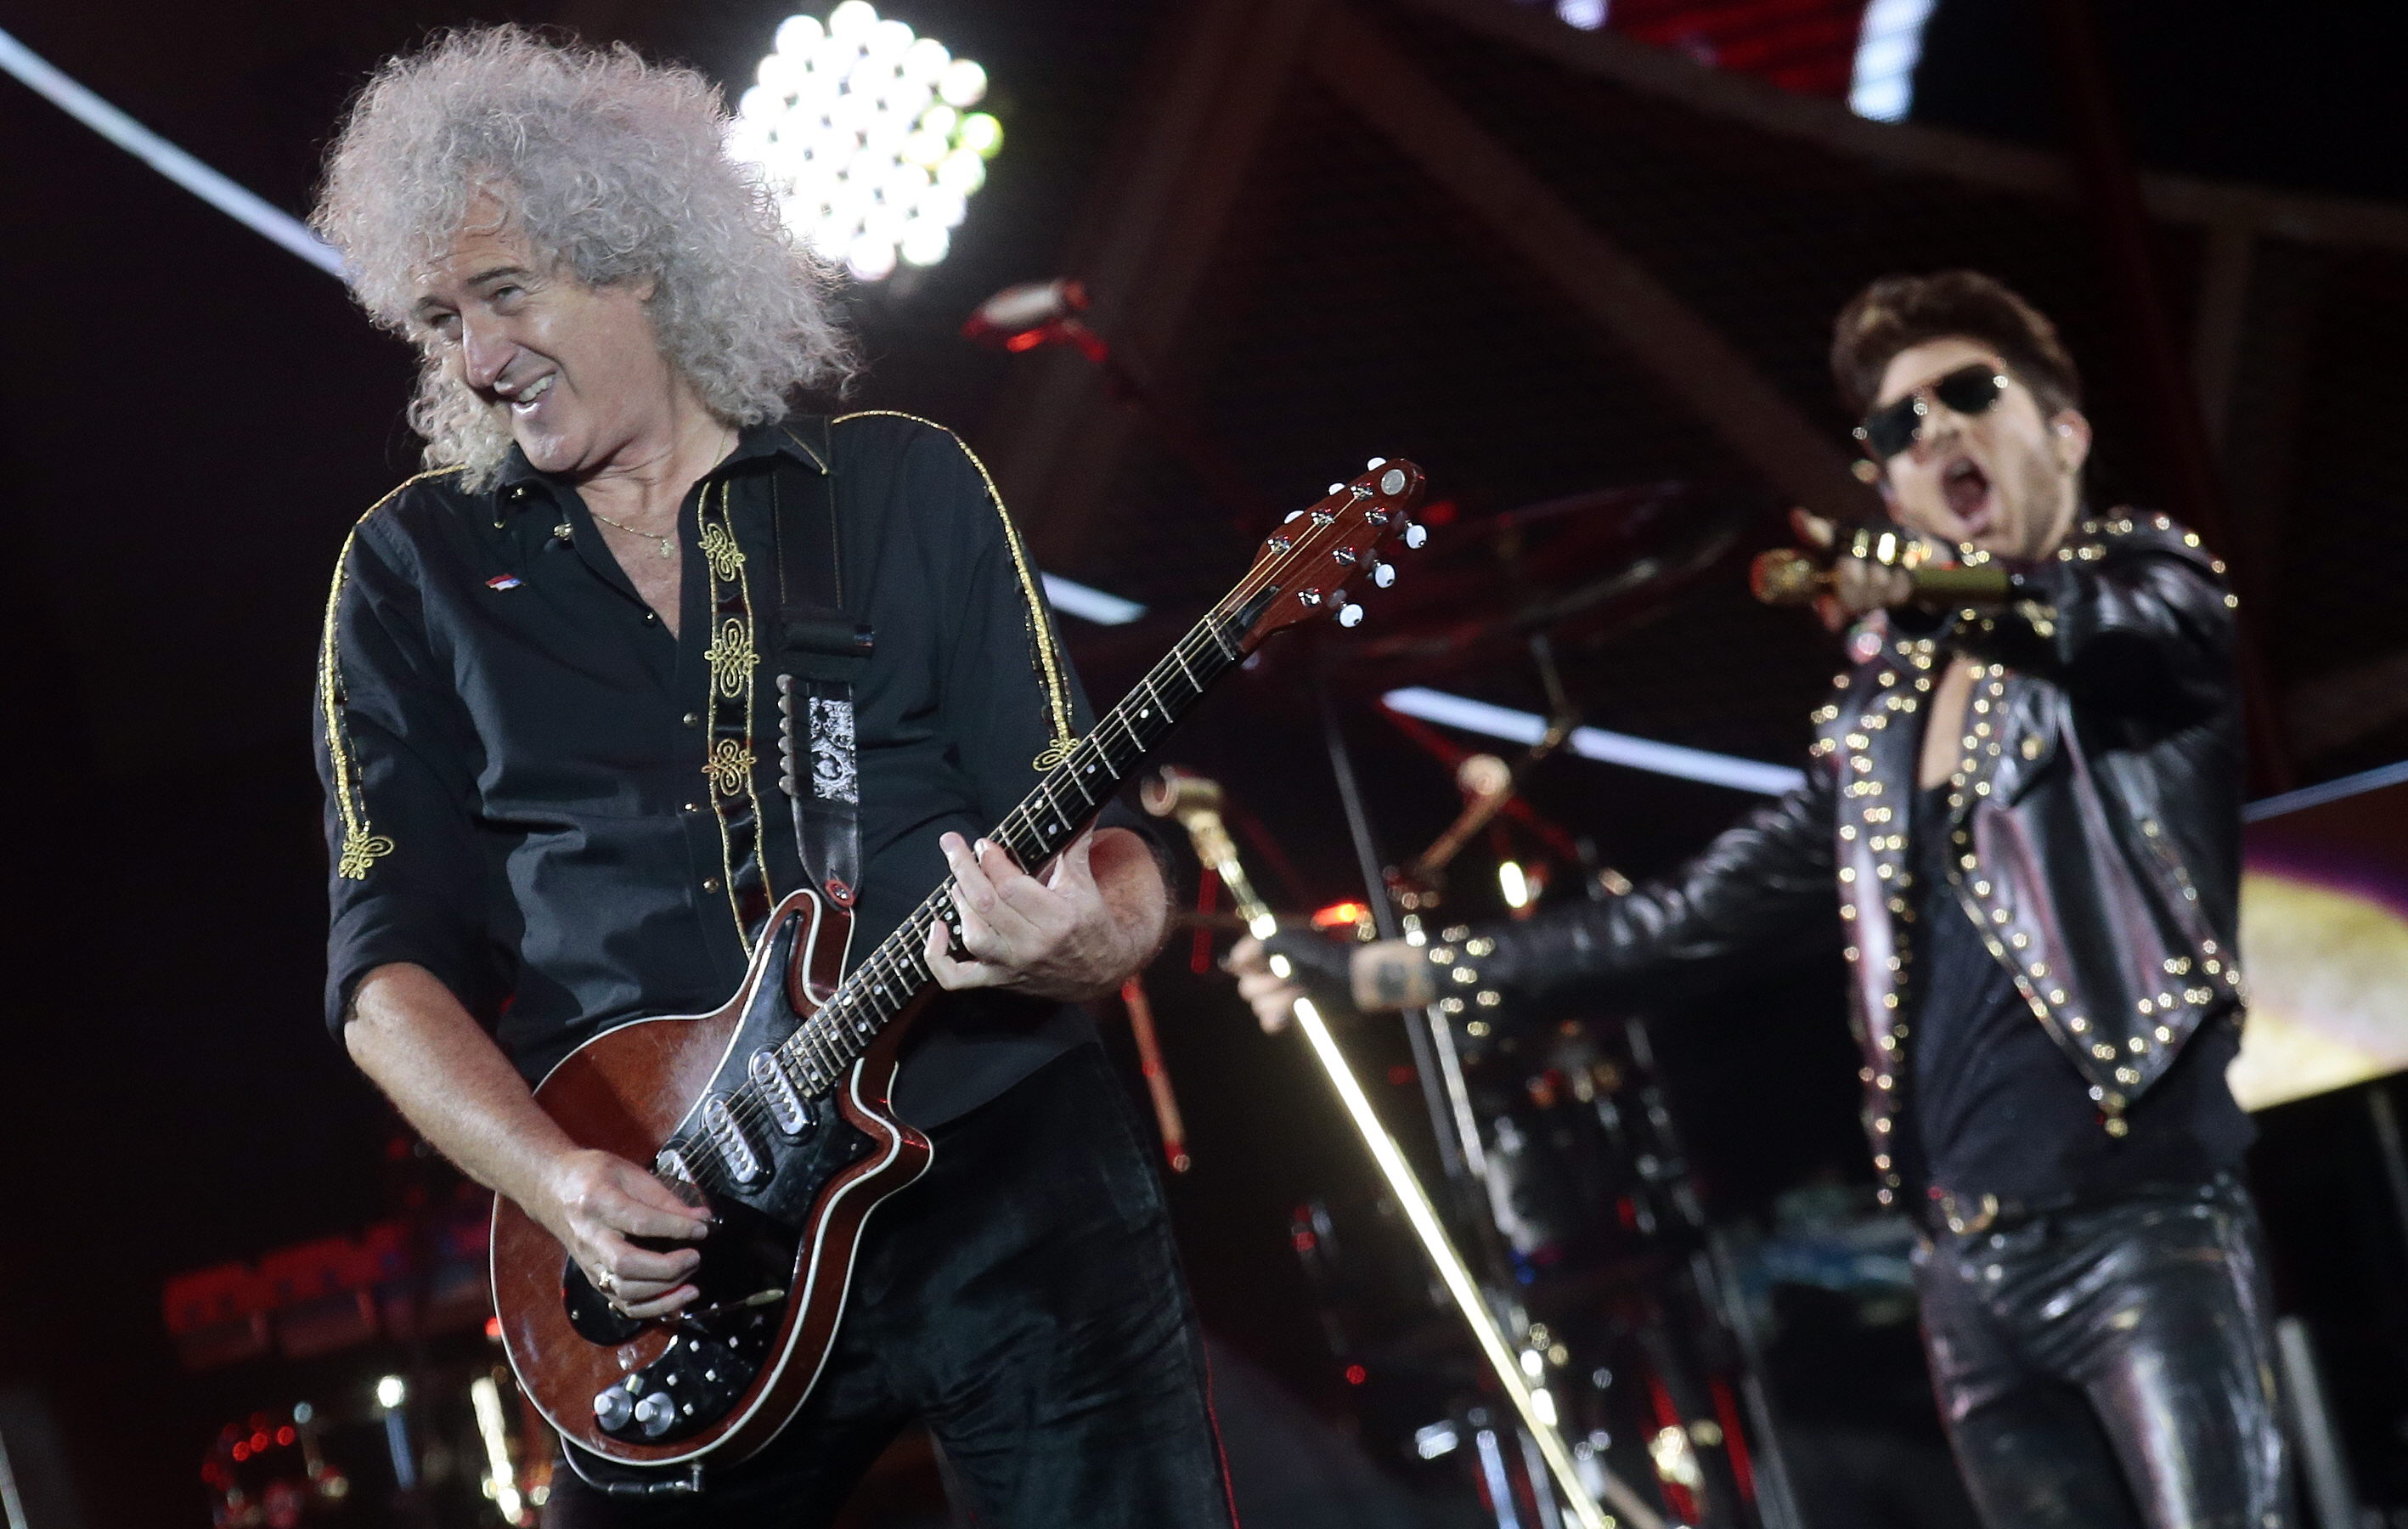 'UNAUTHORIZED USE.' The iconic British band Queen has protested the use of their hit, 'We Are the Champions' at the Republican National Convention. In this file photo, Brian May performs next to singer Adam Lambert during a concert with British band Queen as part of their tour 'Don't Stop Them Now' in Chile, 2015. File photo by Felipe Trueba/EPA 